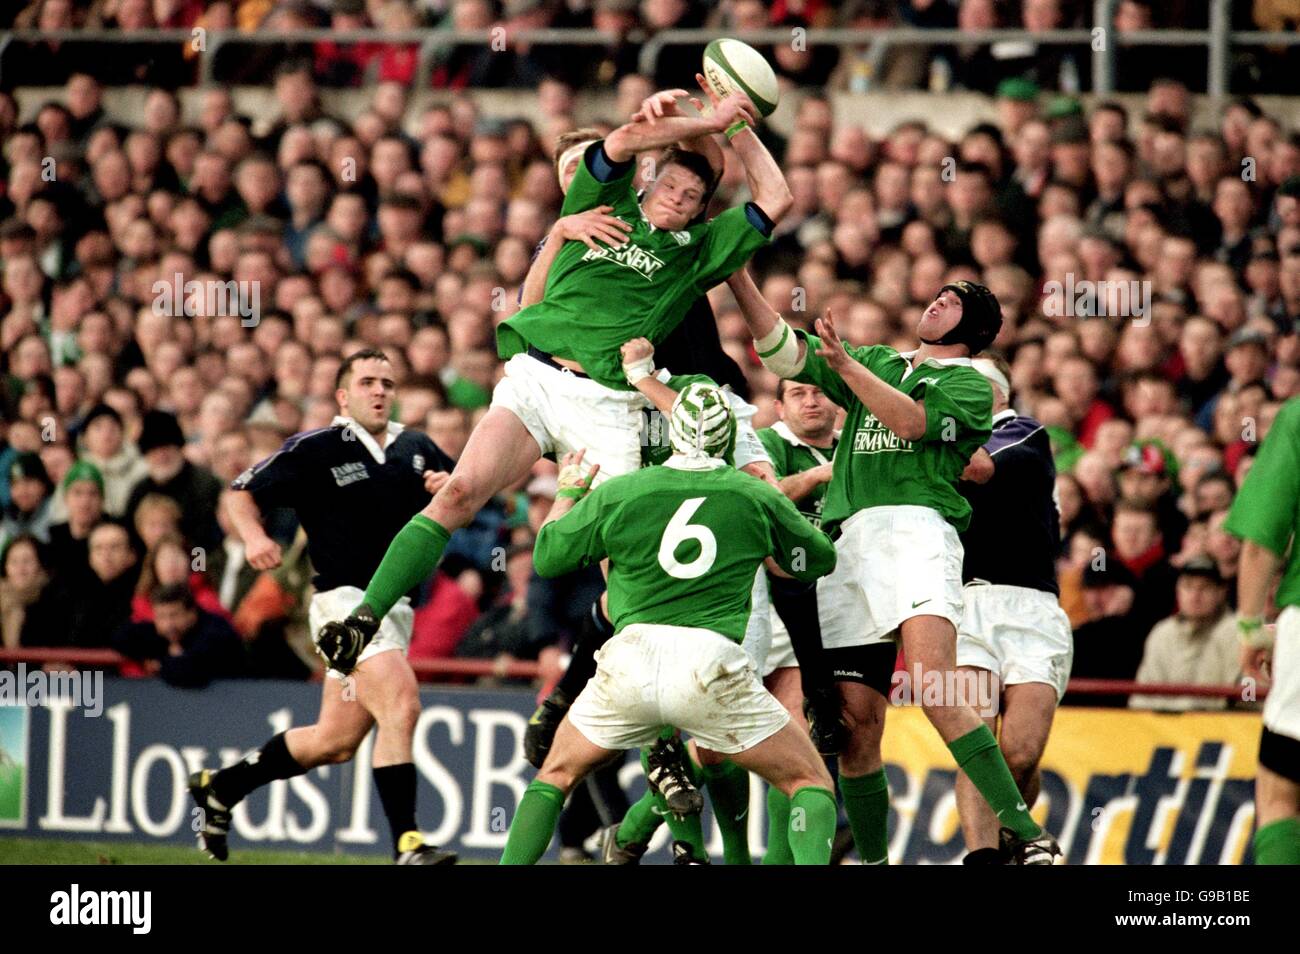 Rugby Union - Lloyds TSB Six Nations Championship - Ireland v Scotland. Ireland's Malcolm O'Kelly wins the line out ball Stock Photo